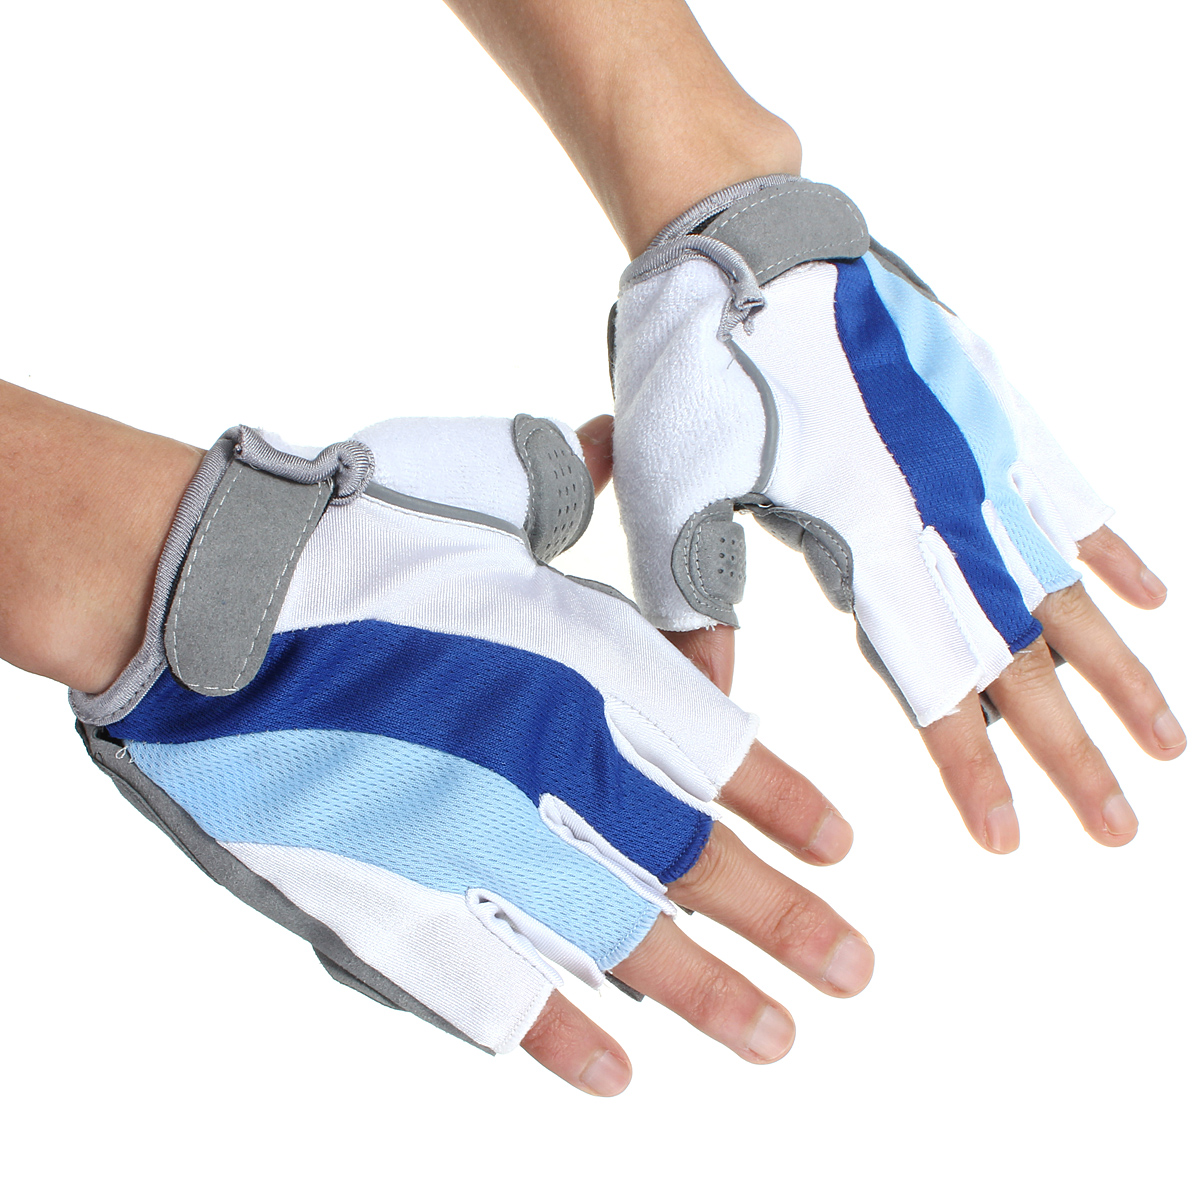 

Bicycle BikeSilicone Comfortable Half Finger Fingerless Gloves Blue